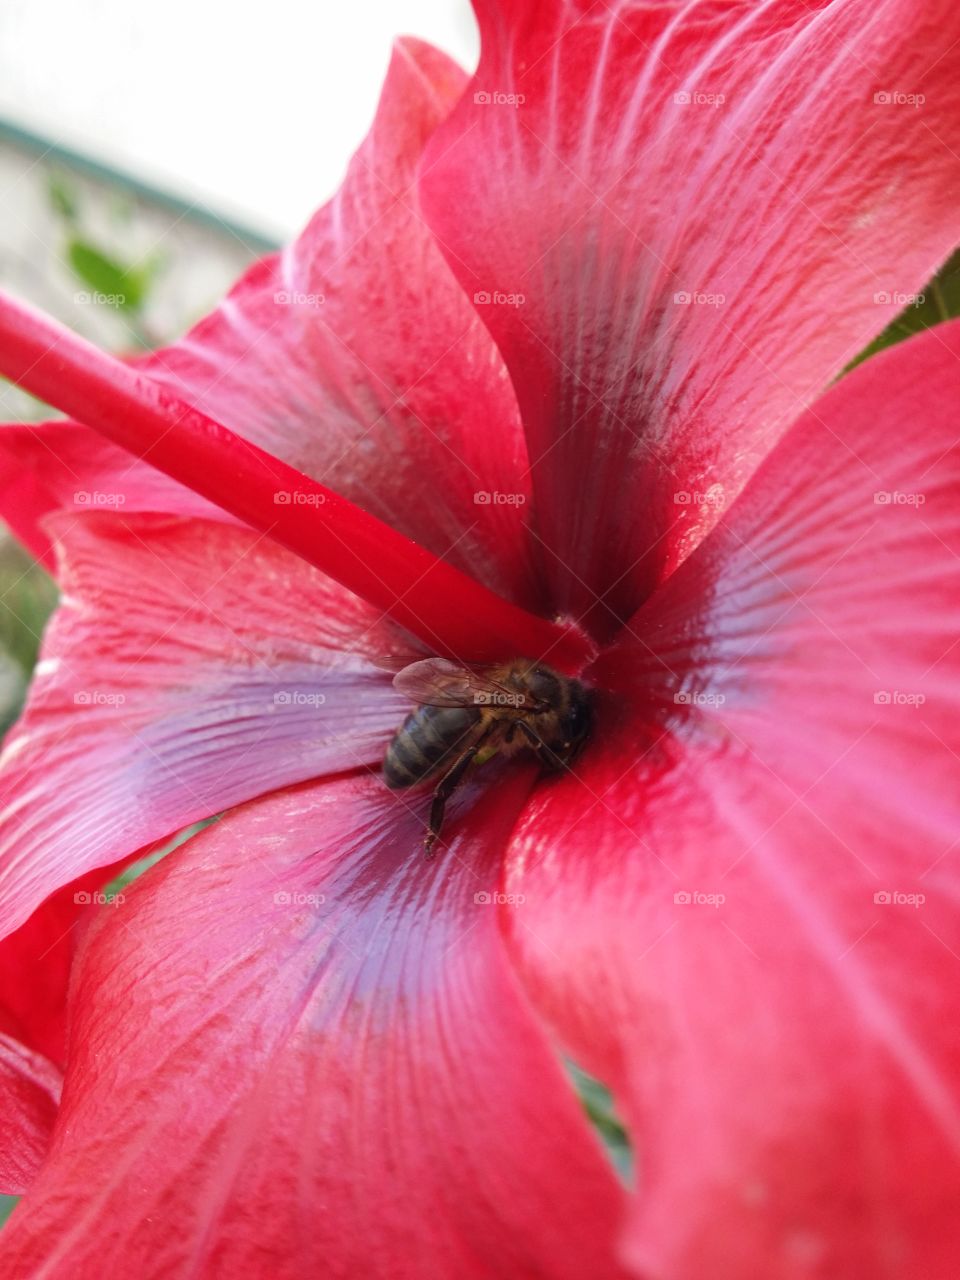 bee in the flower1. going to work